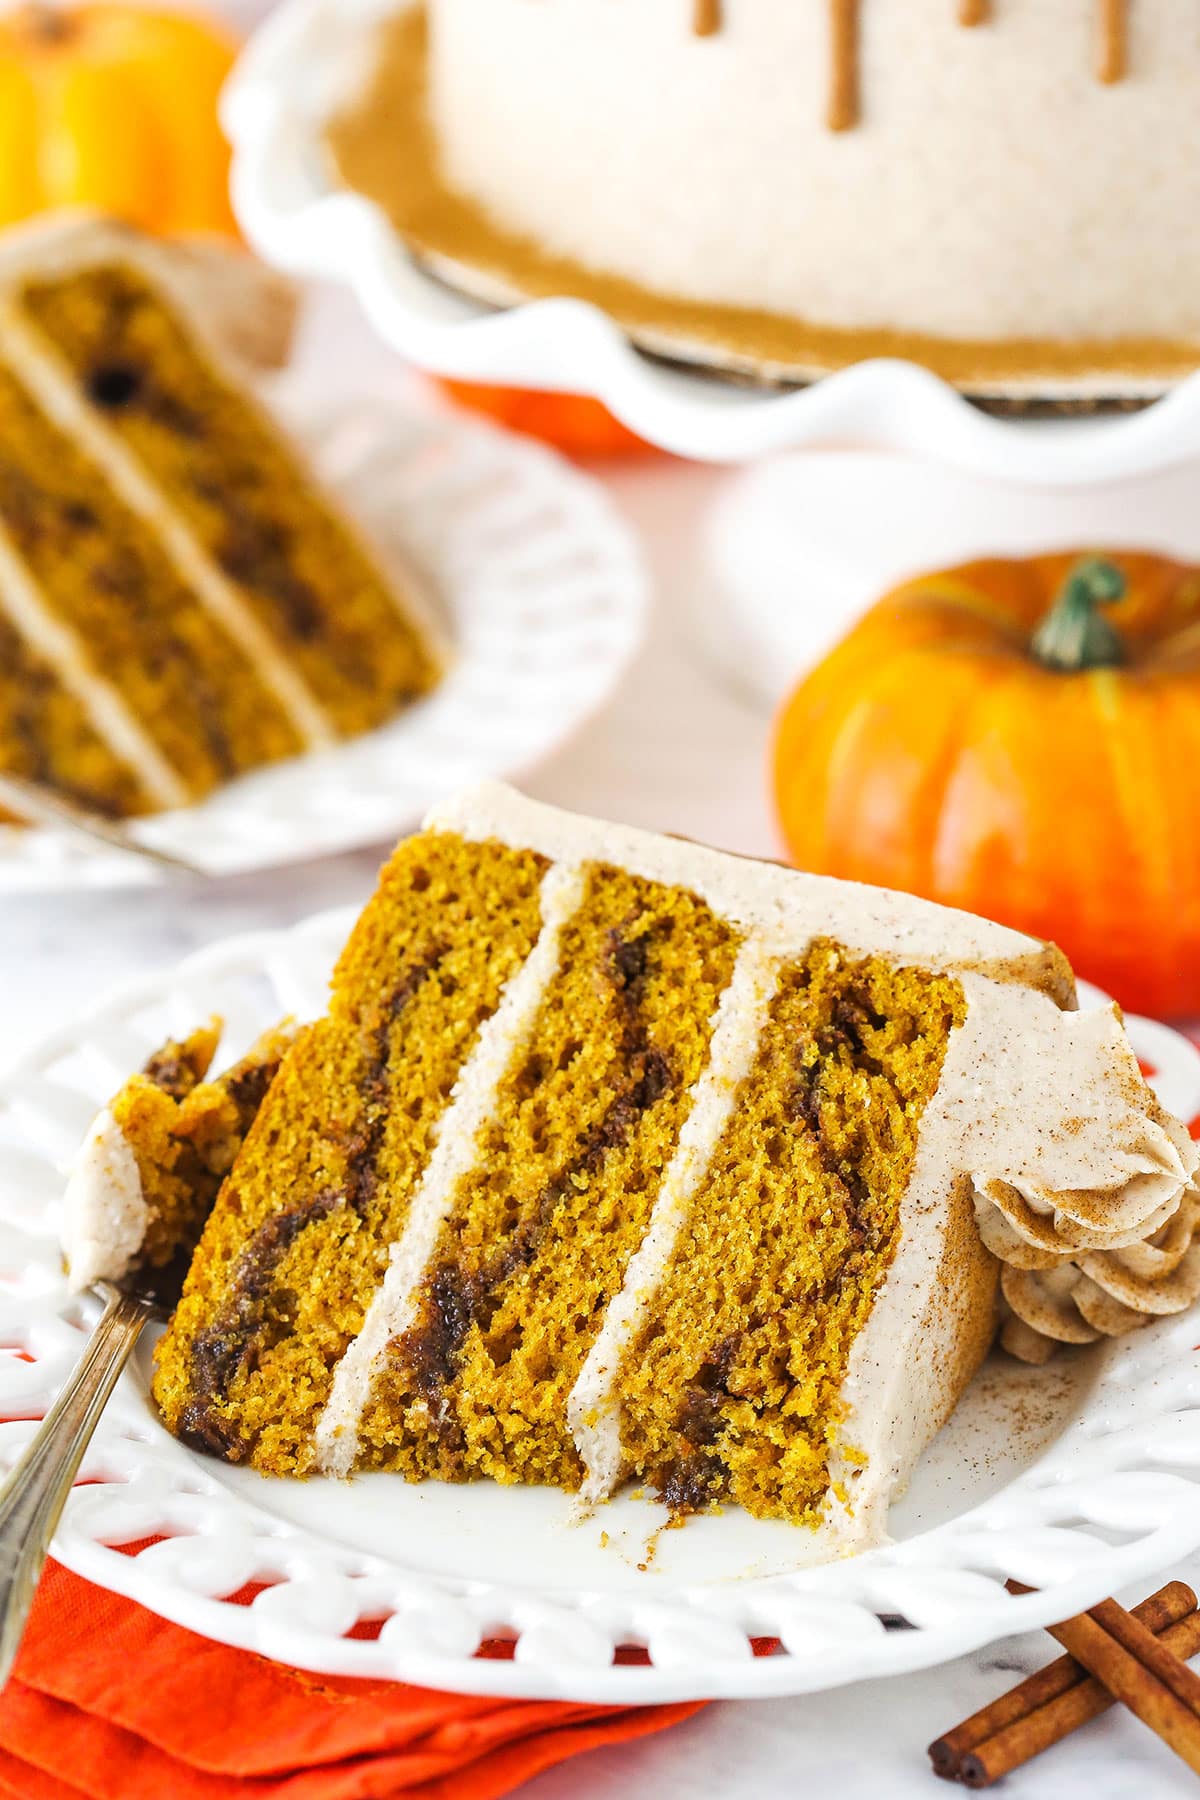 A slice of Cinnamon Sugar Swirl Pumpkin Layer Cake on it's side on a white plate with a bite taken.